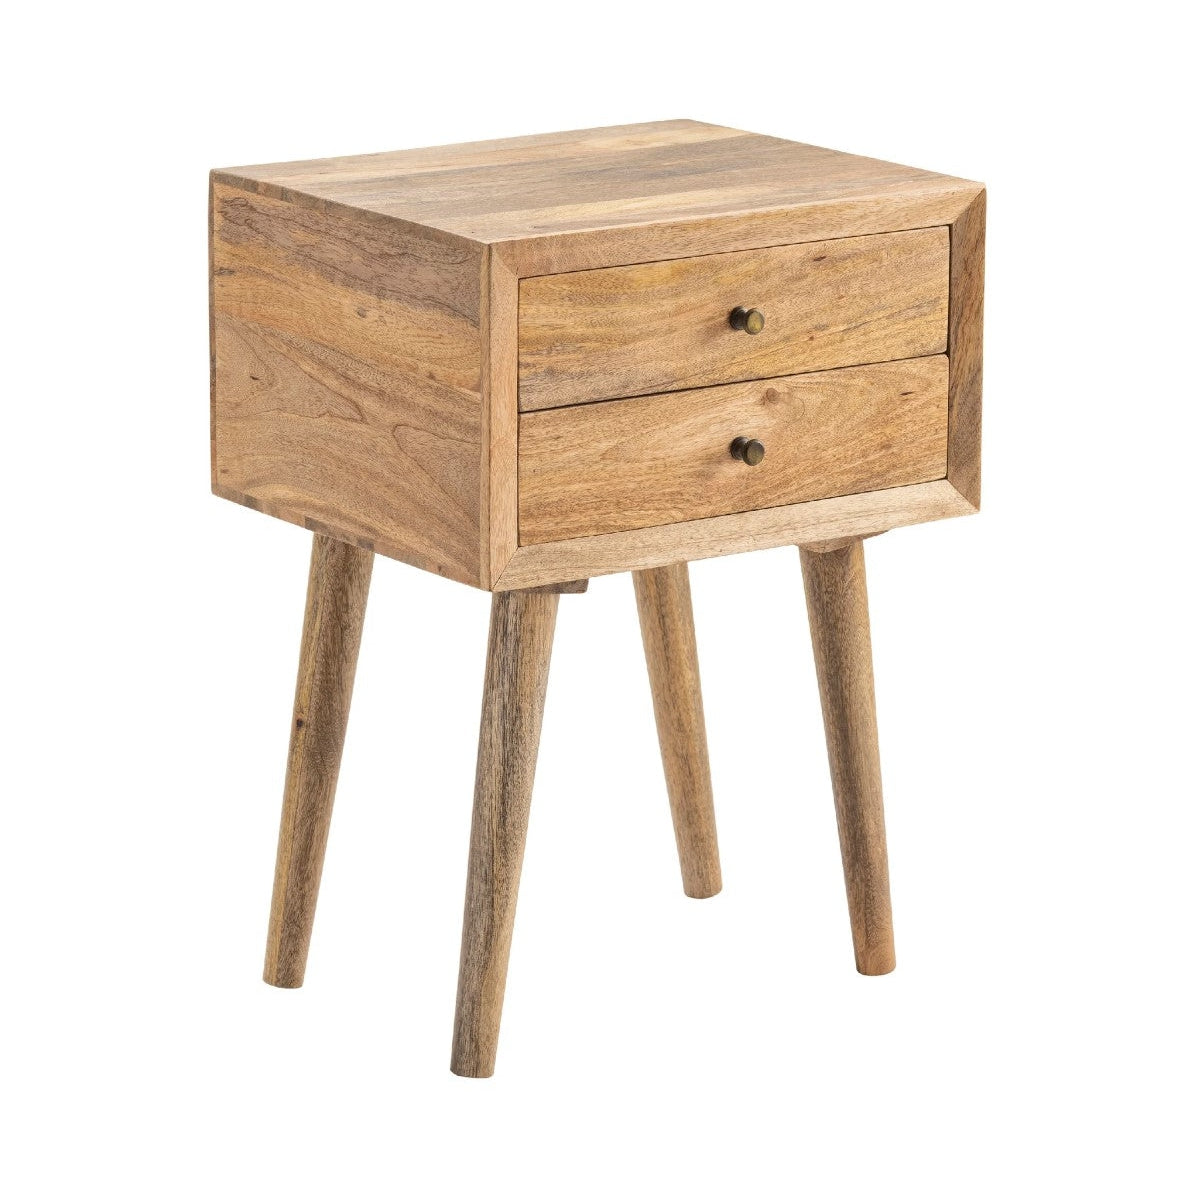 Crestview Collection Bengal Manor 18" x 15" x 25" 2-Drawer Rustic Mango Wood Accent Table In Natural Finish